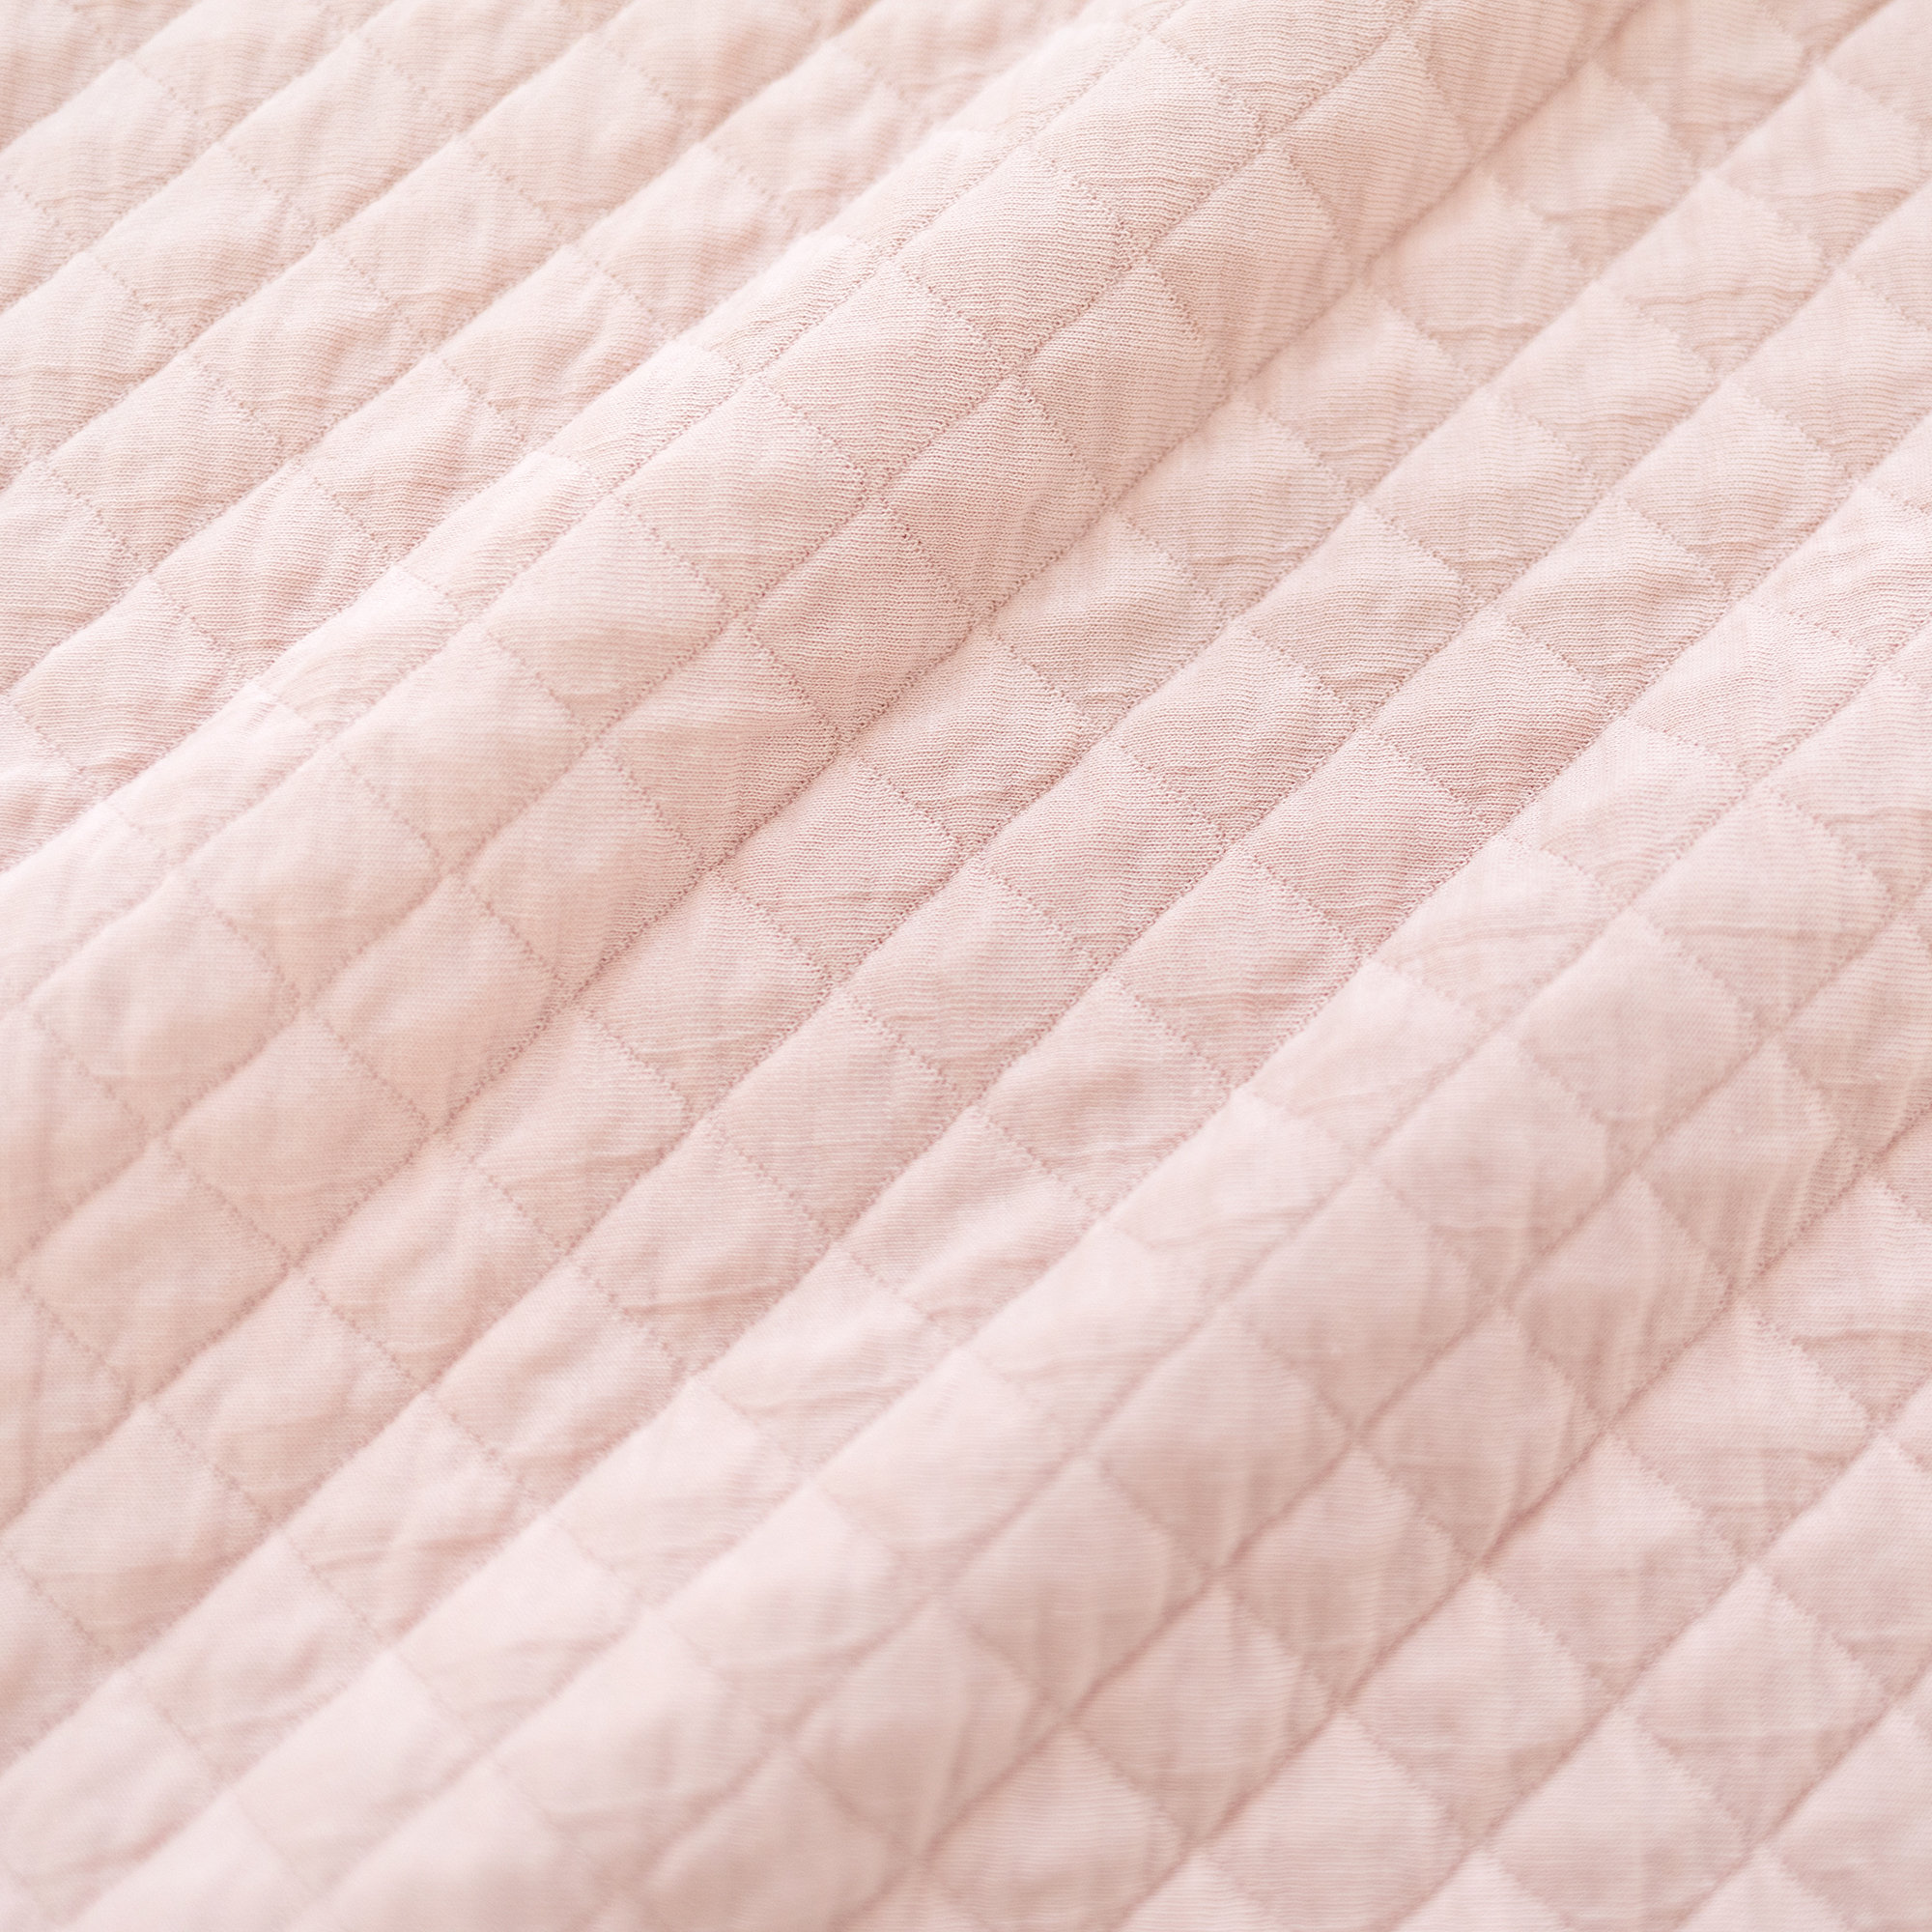 Babero waterproof Pady quilted jersey 37cm QUILT Blush